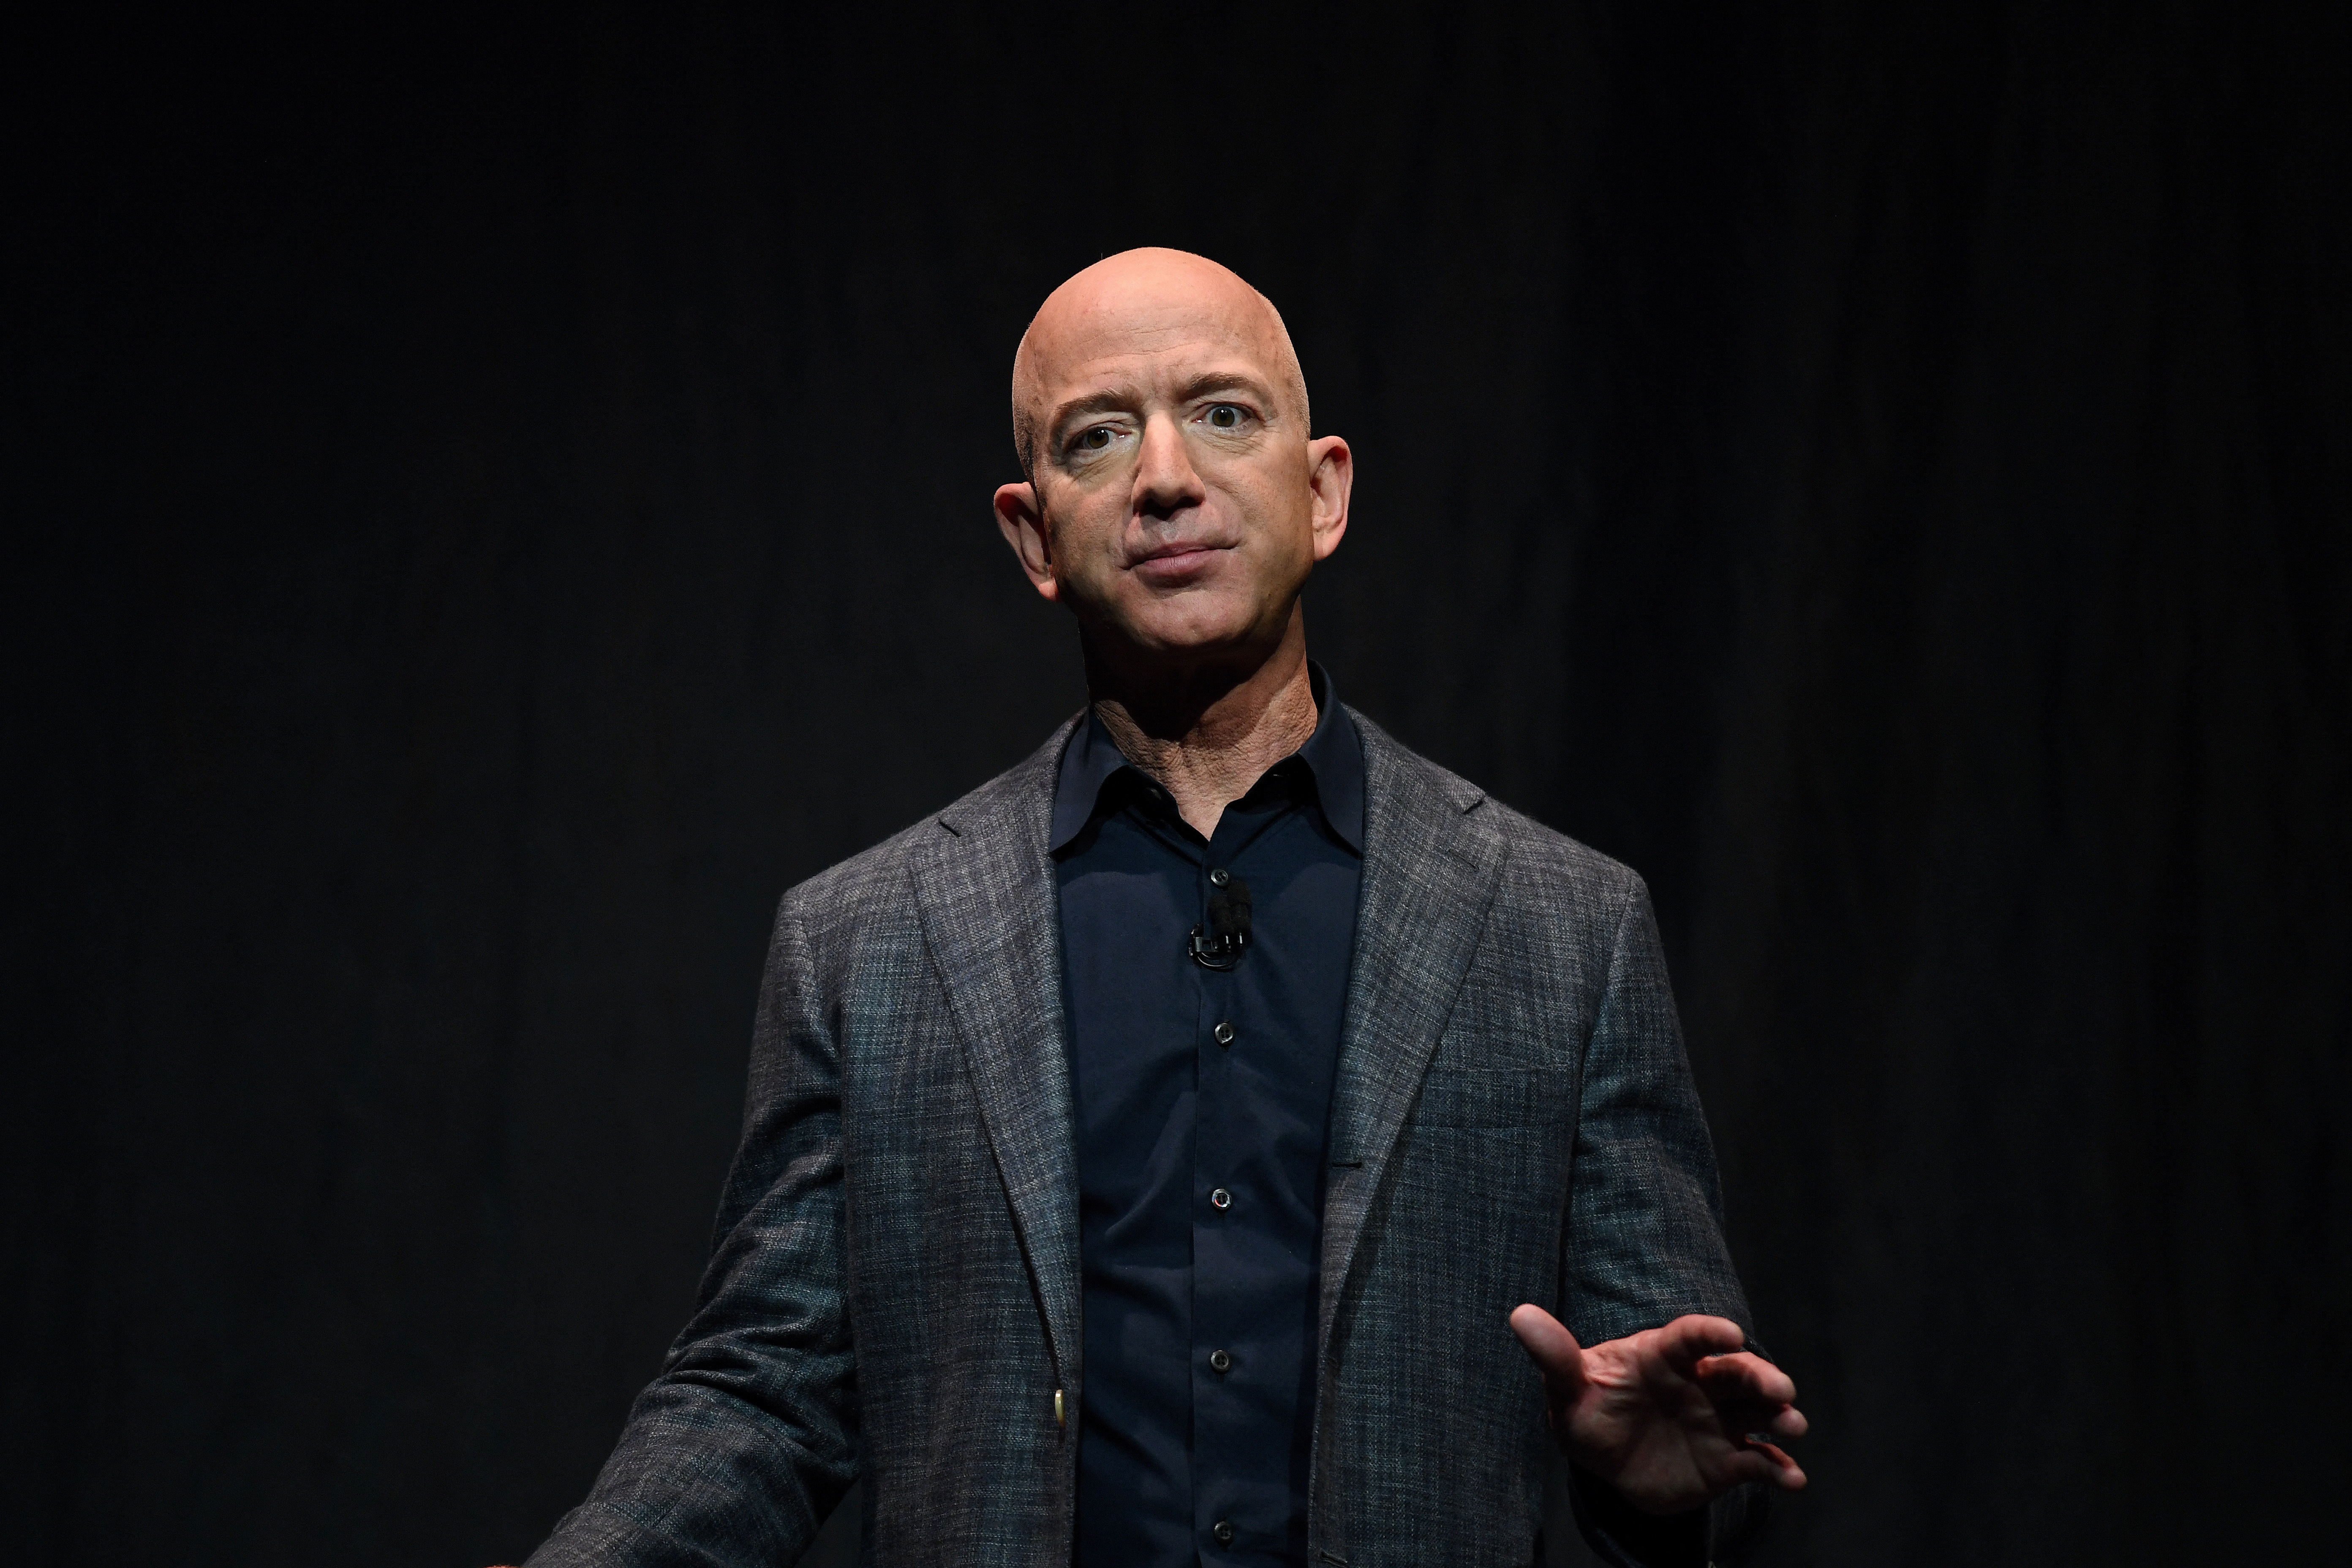 Amazon founder Jeff Bezos speaks during an event about Blue Origin's space exploration plans in Washington